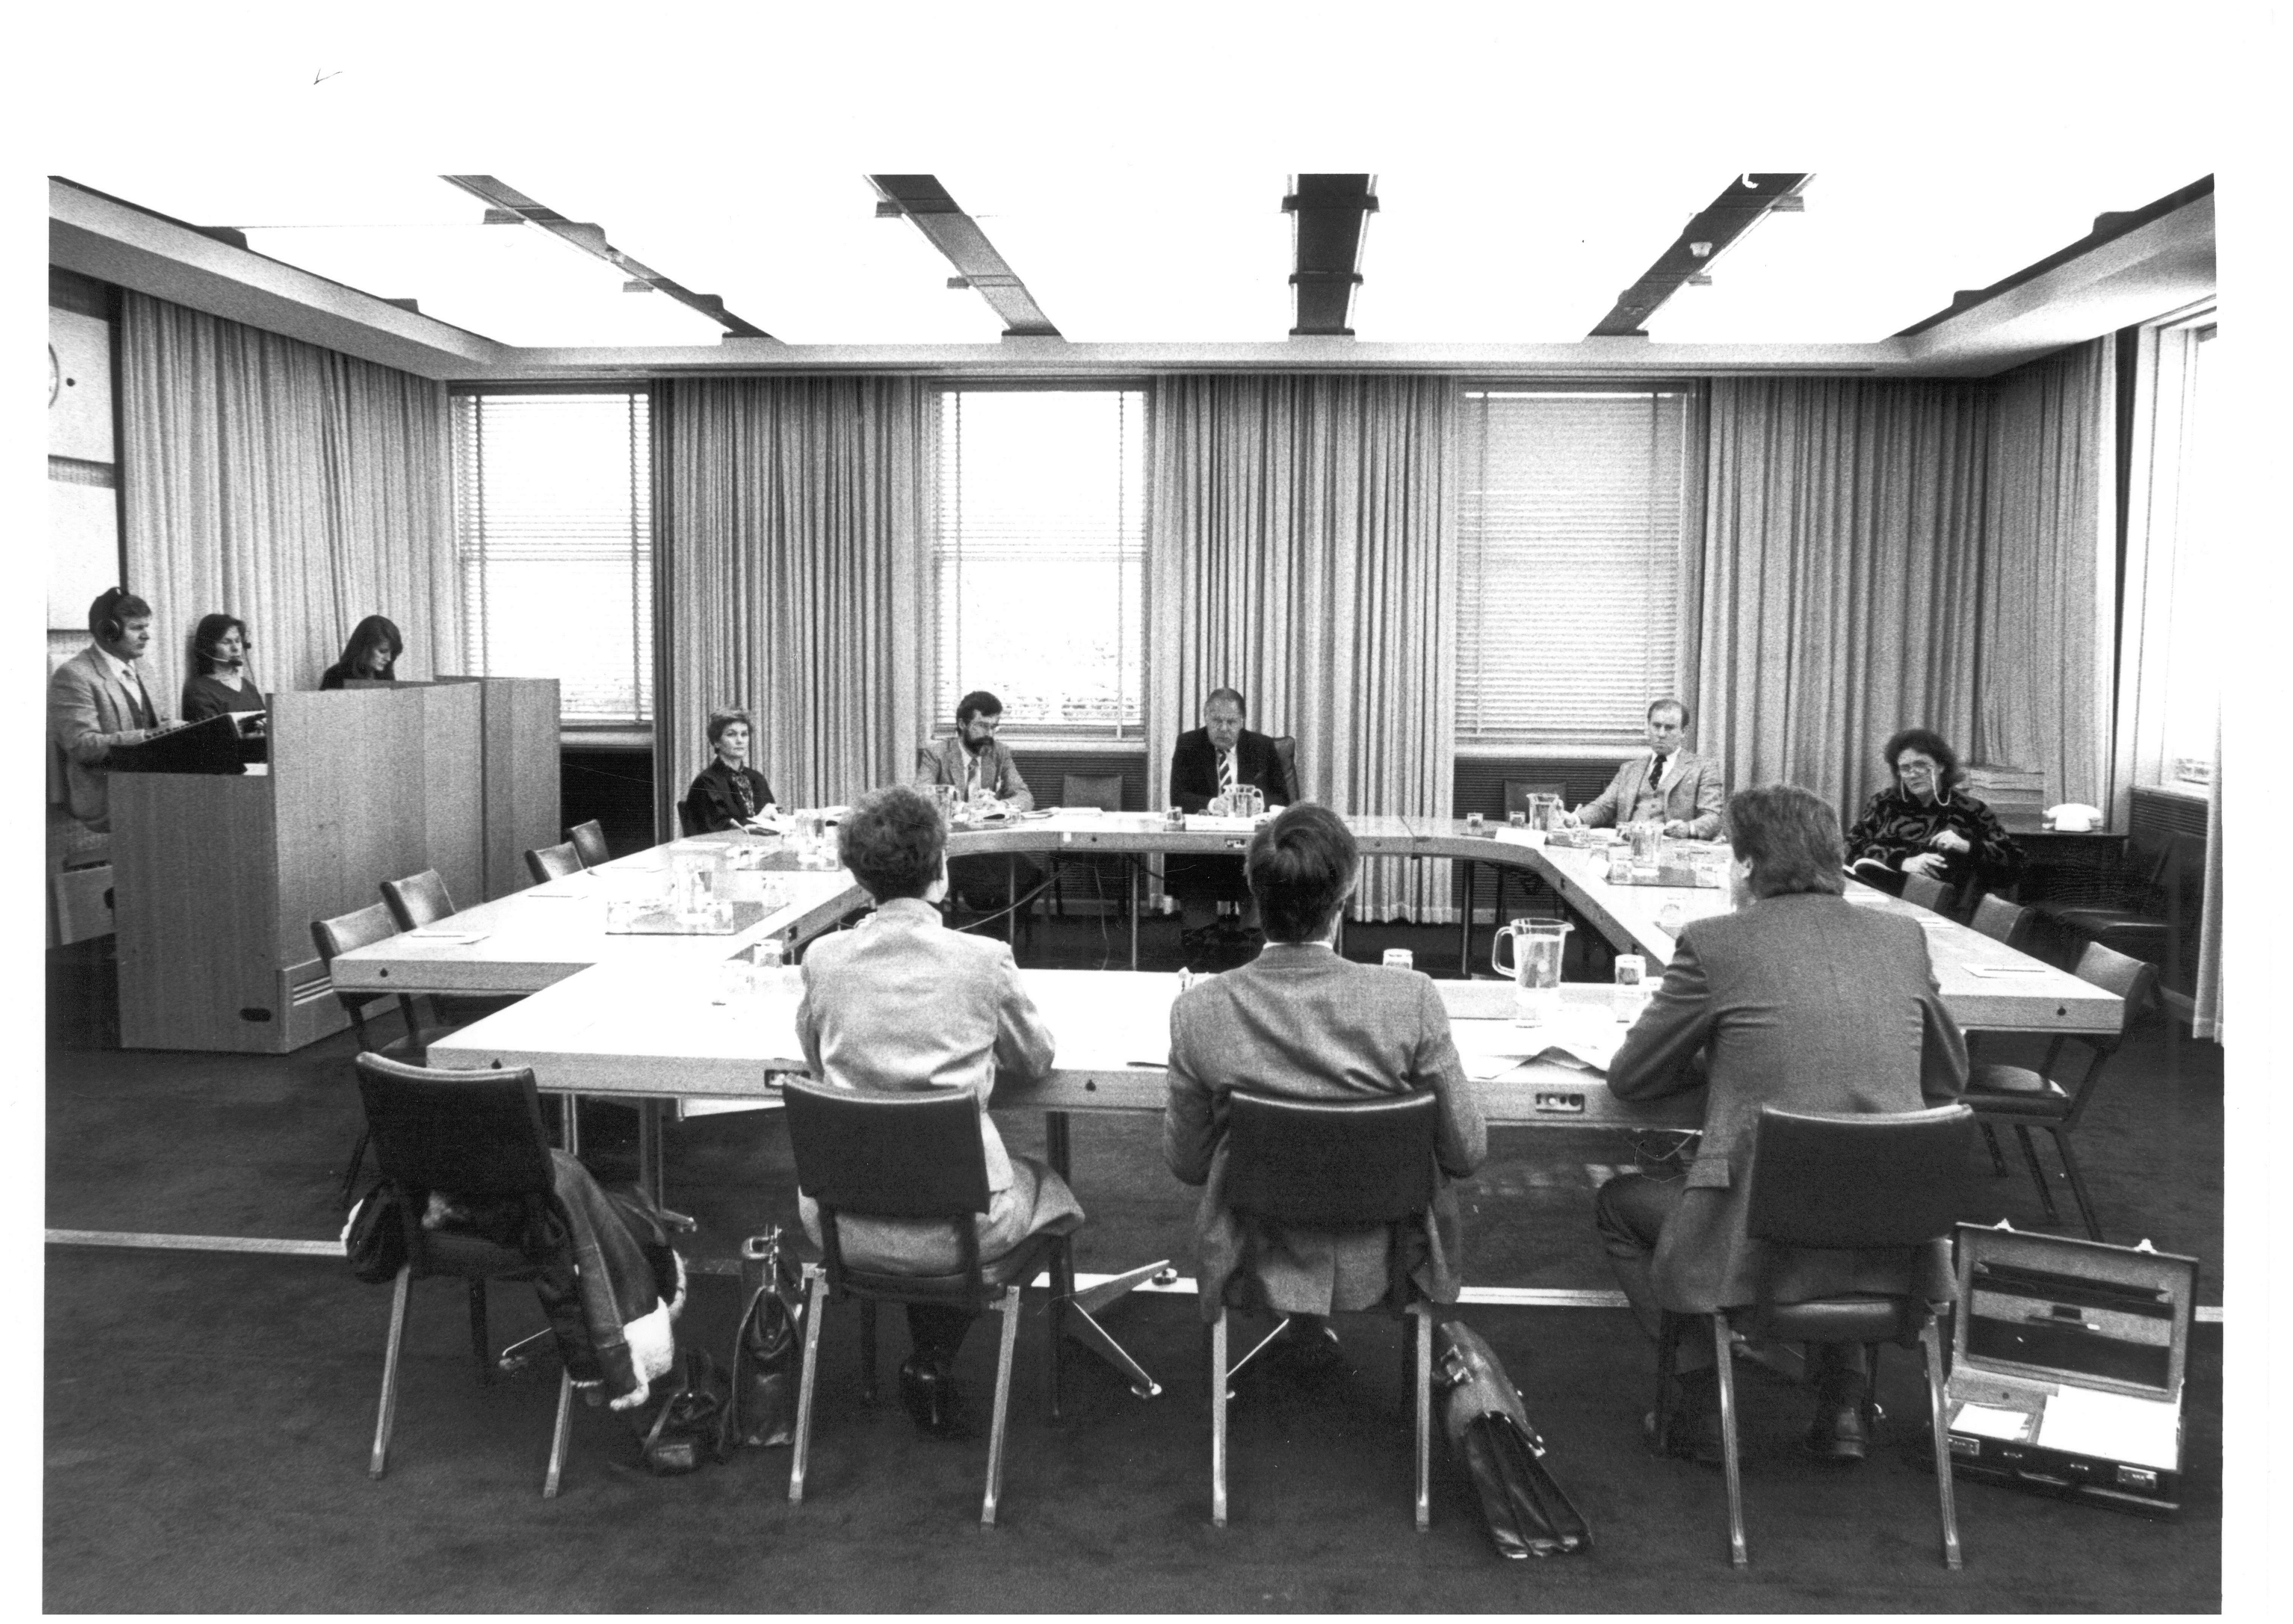 Standing Committee on Education and the Arts questioning officers from the Department of Education and Commonwealth Schools Commission at a public hearing of its inquiry into the education of gifted and talented children, 14 July 1986. After the 1987 election, the inquiry was referred to a select committee with the same membership for completion. Seated facing camera L-R: Senator Jocelyn Newman, Terry Brown [Secretary], Senators Mal Colston [Chair], Baden Teague and Margaret Reynolds.